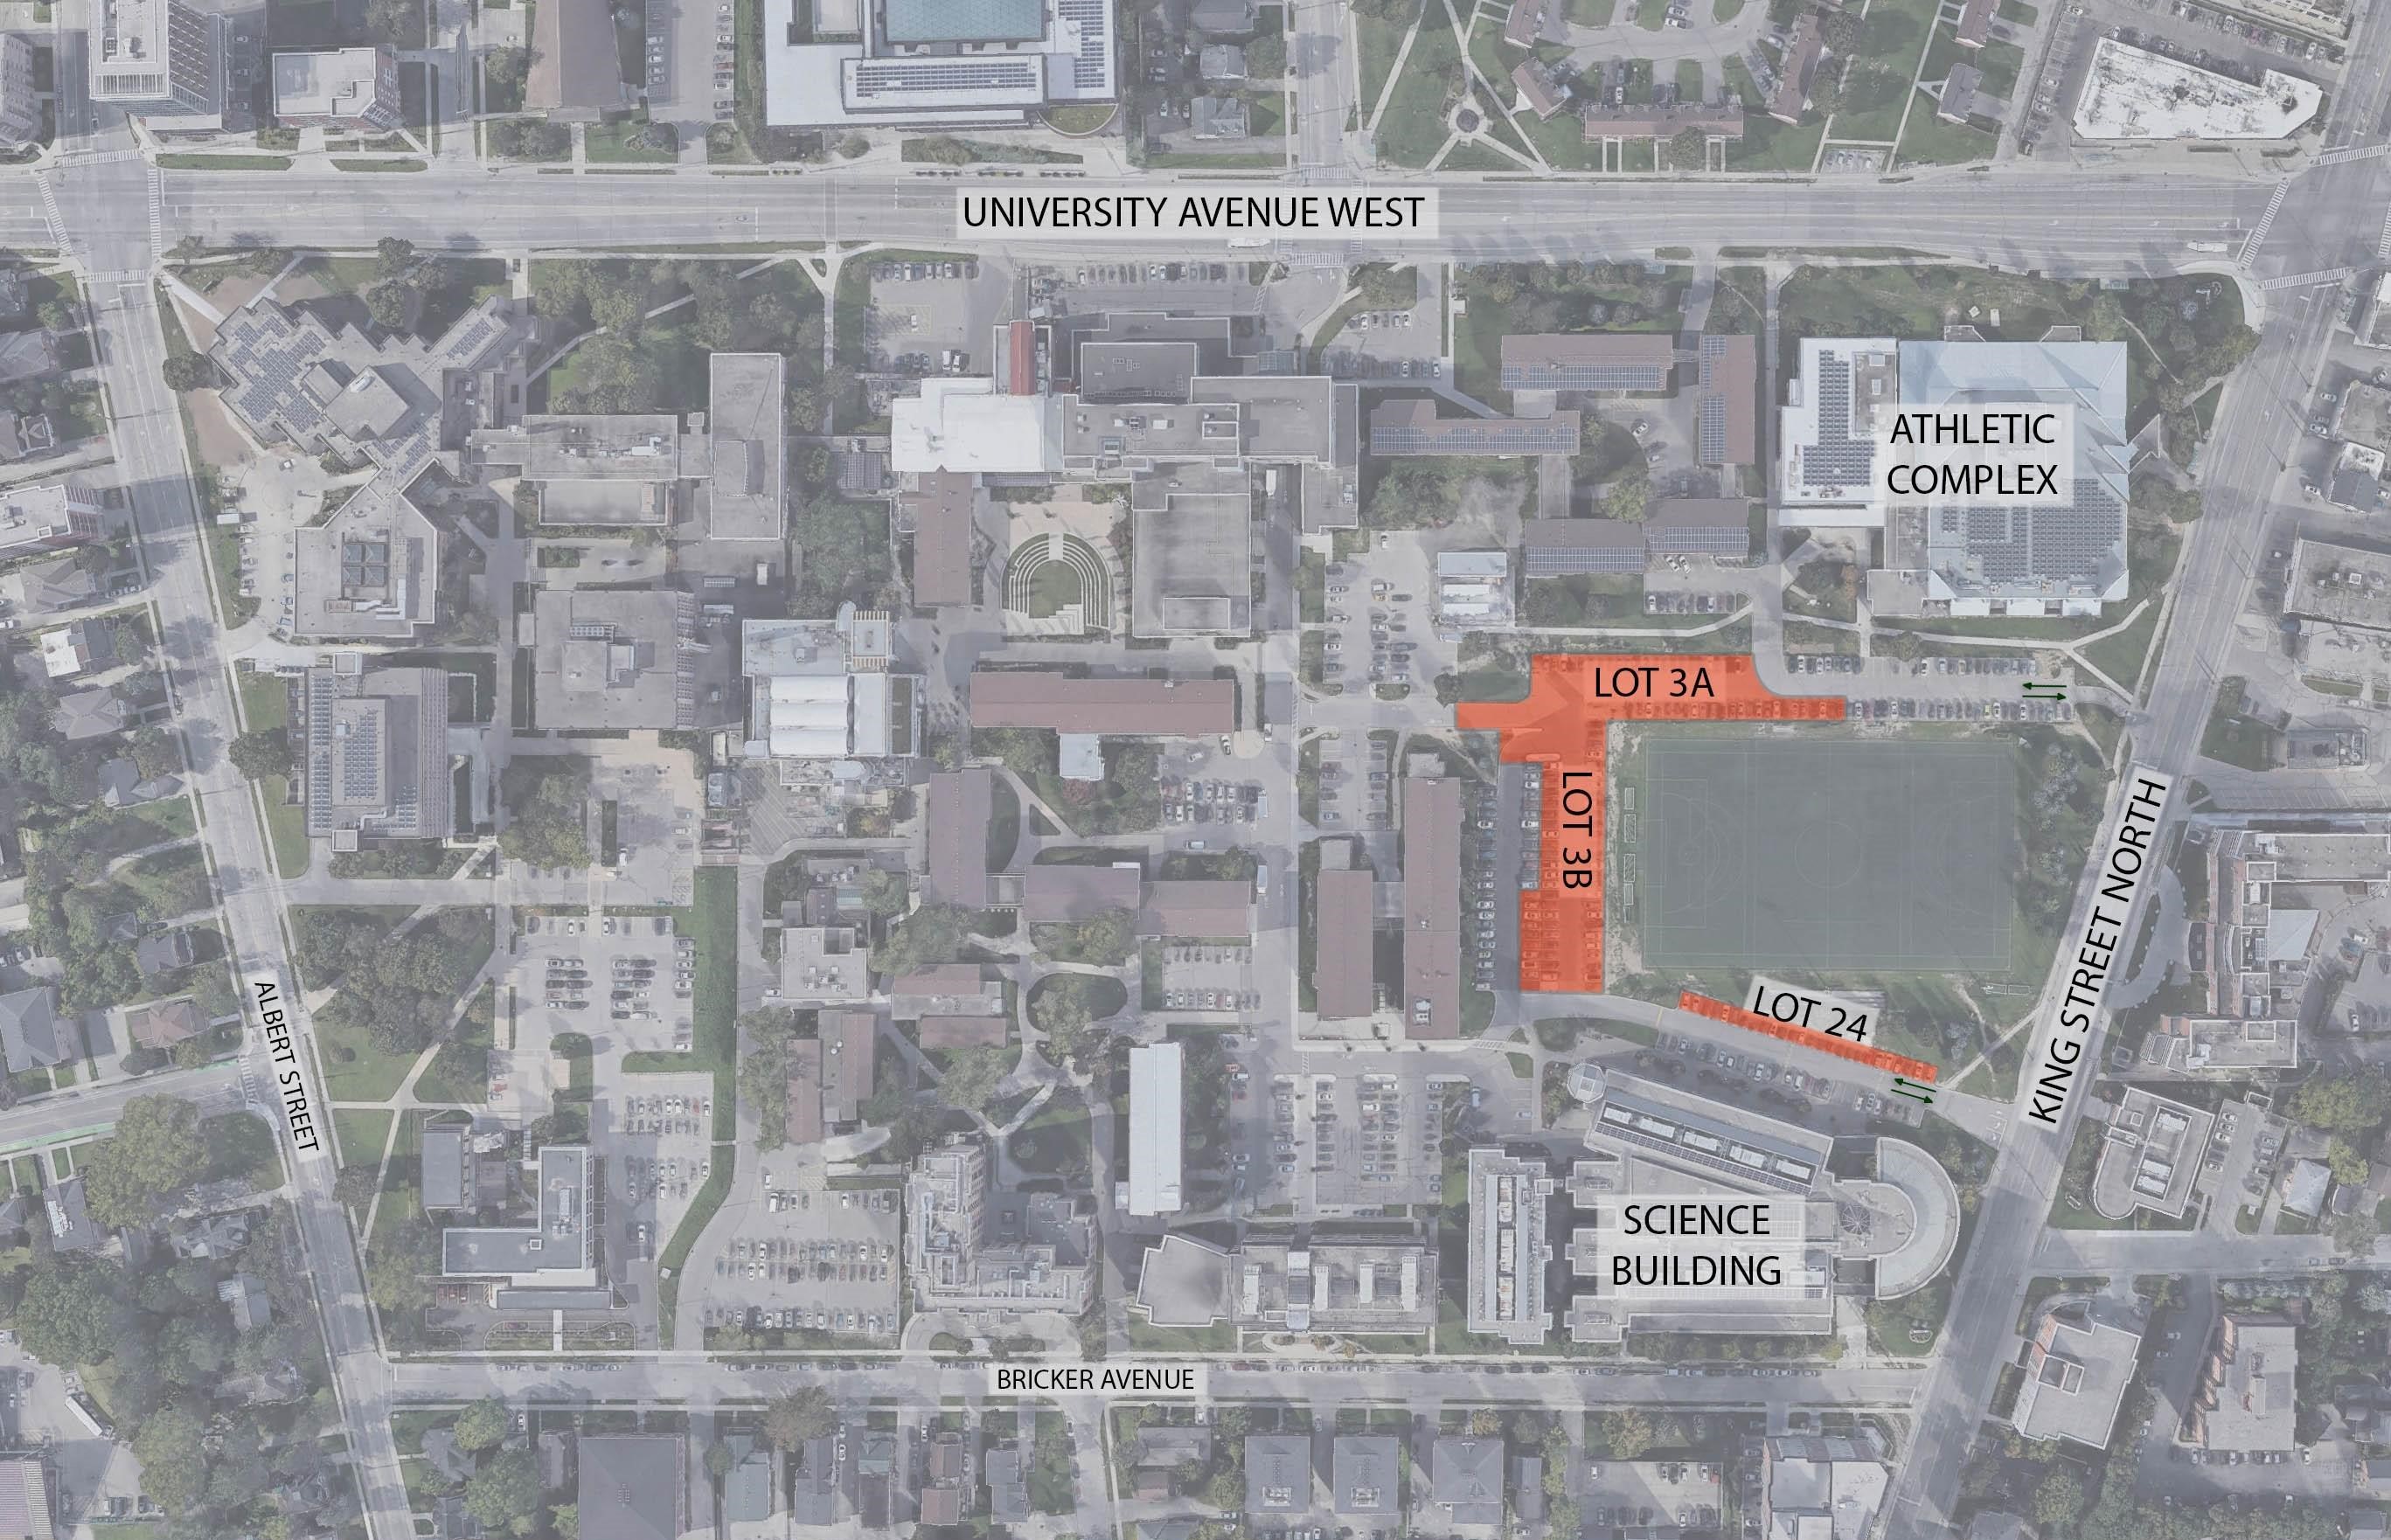 campus-map-displaying-partial-parking-lot-closures-lot3a-3b-24-and-alternate-campus-entrances-from-king-street-north